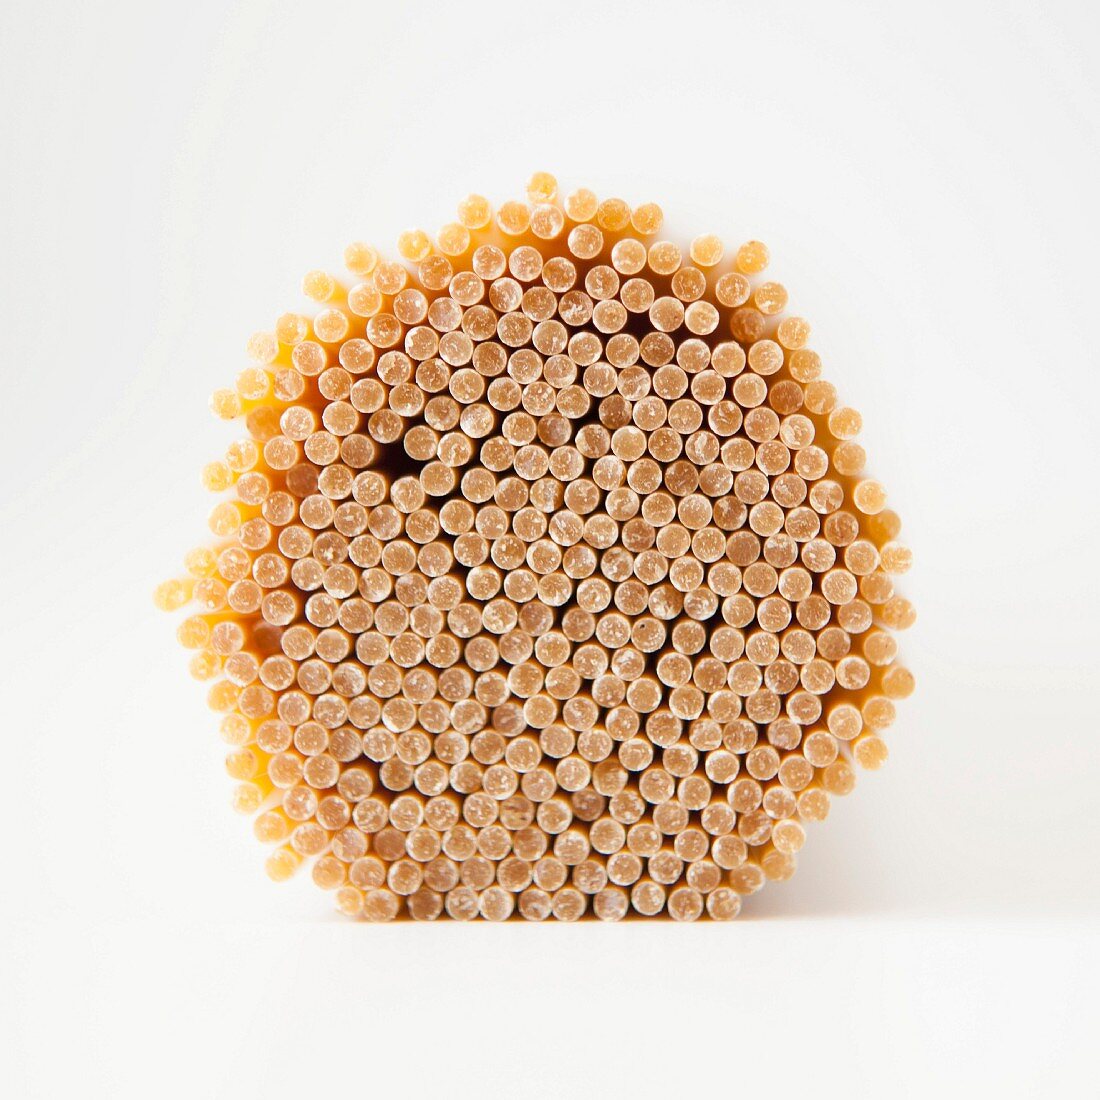 Bunch of dried spaghetti, close-up